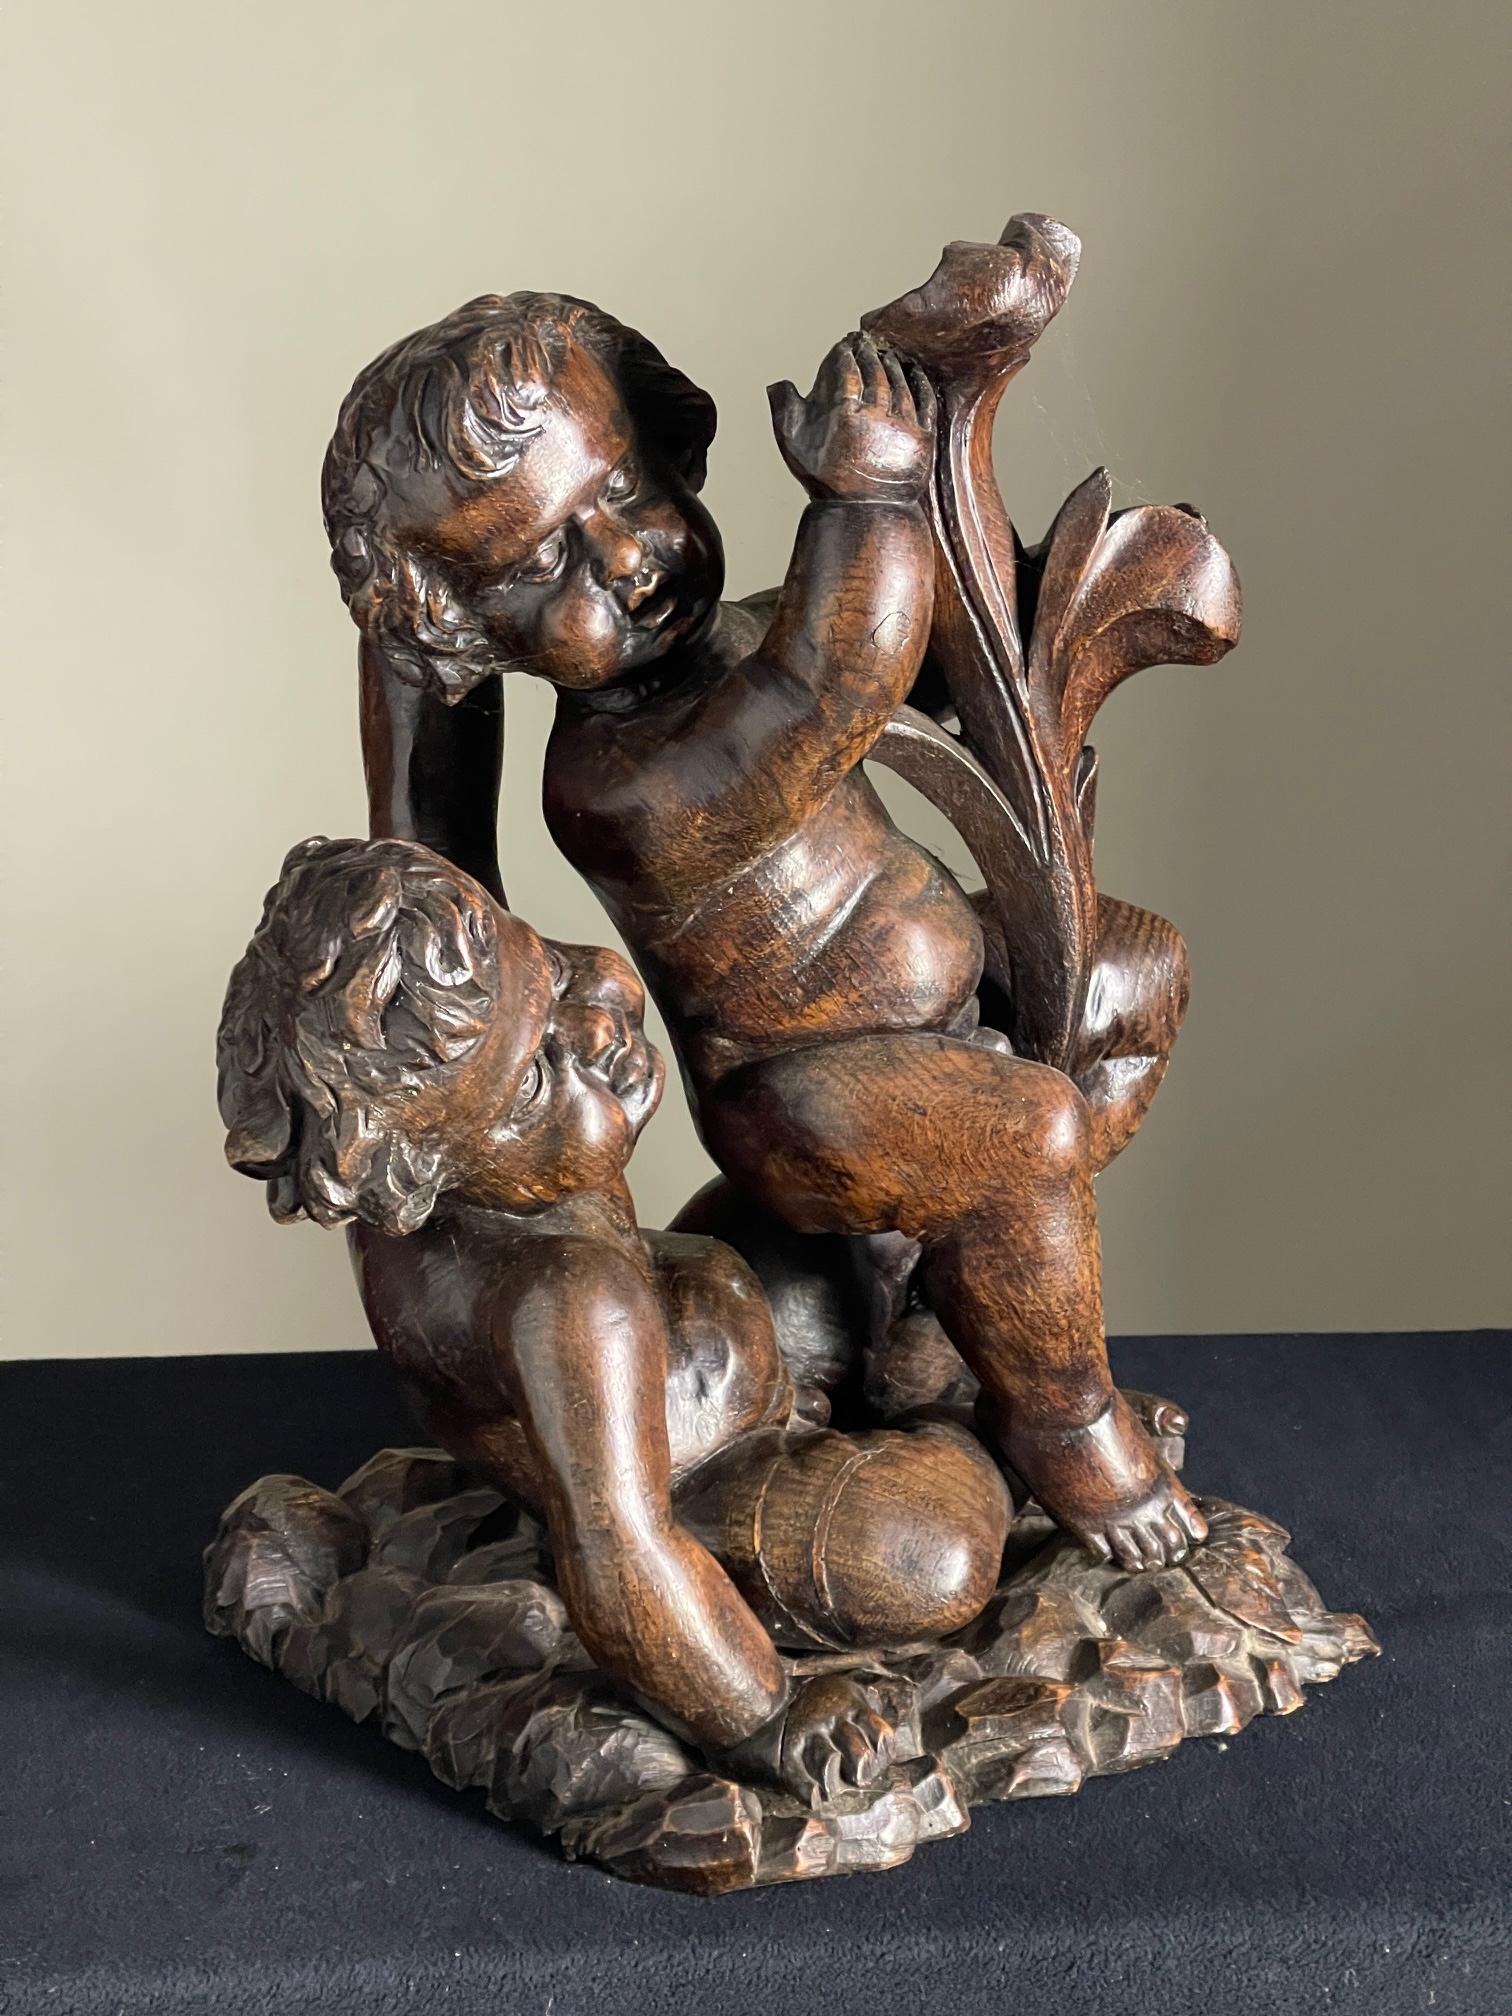 Late 17th century wood carving.

C1690 carving of putti in a playing position on a original rocky base great patination and colour

size 60cms high 44 wide 36 deep